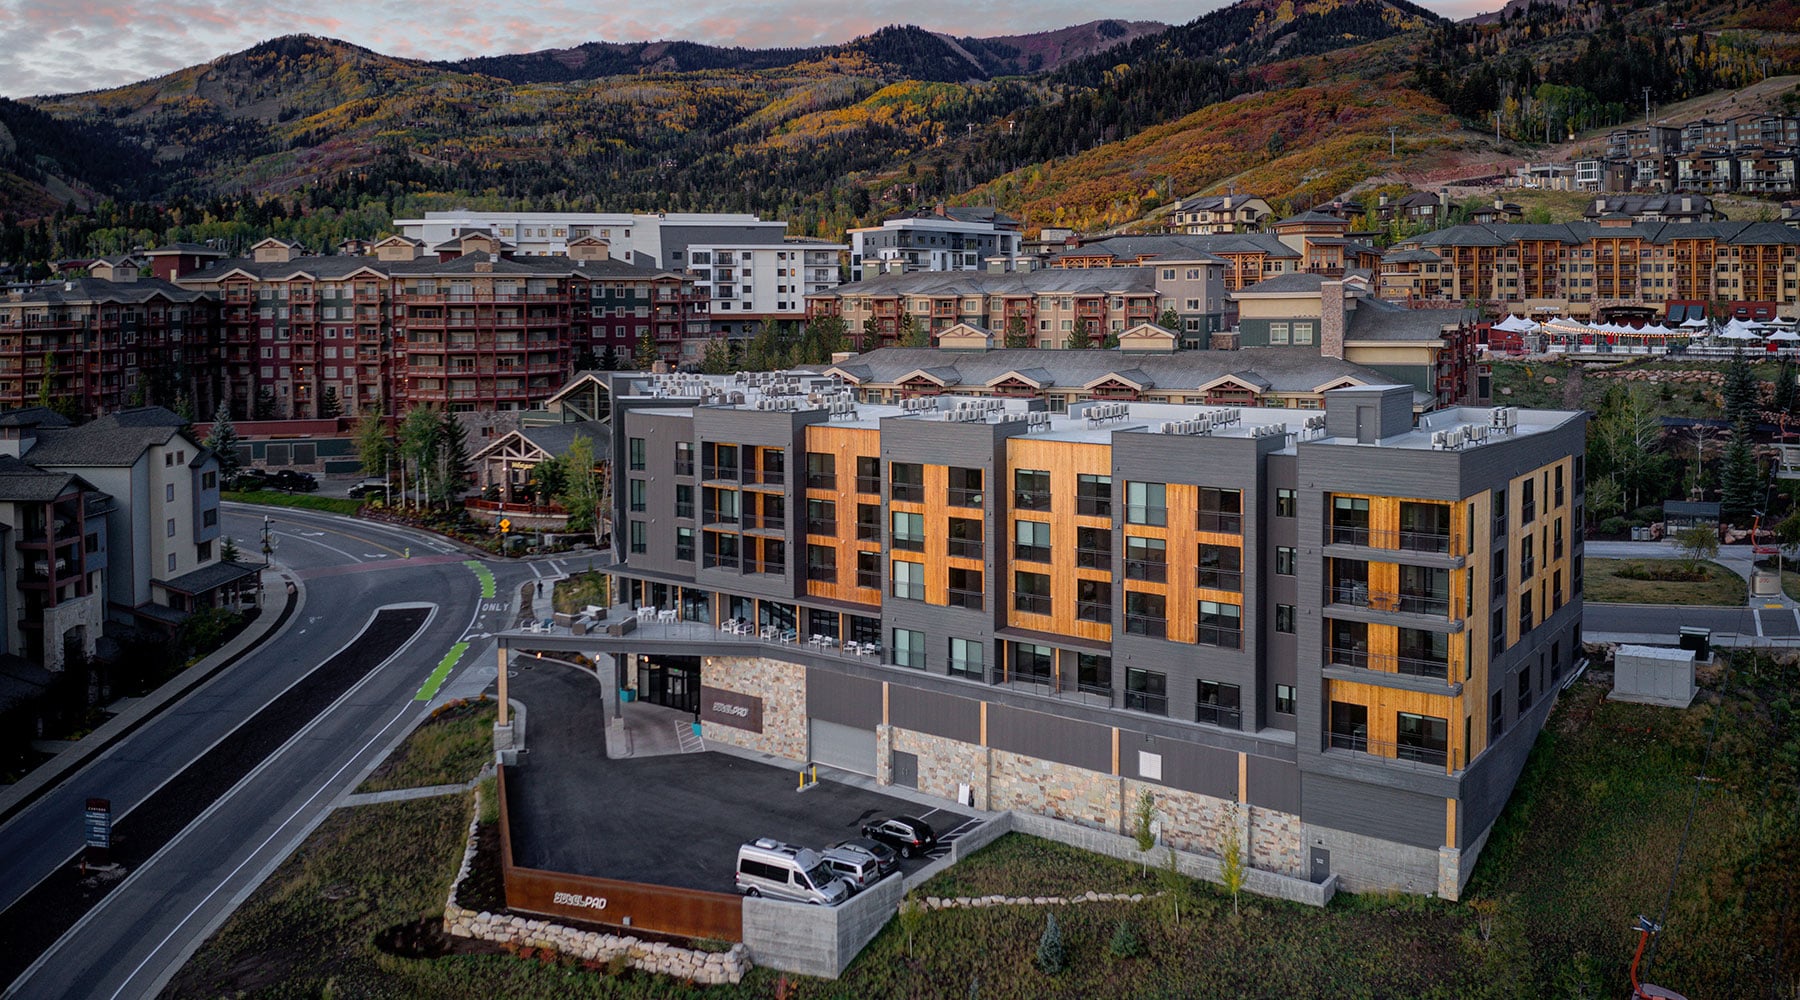 YOTELPAD To Offer New Condos At The Village At Mammoth in California